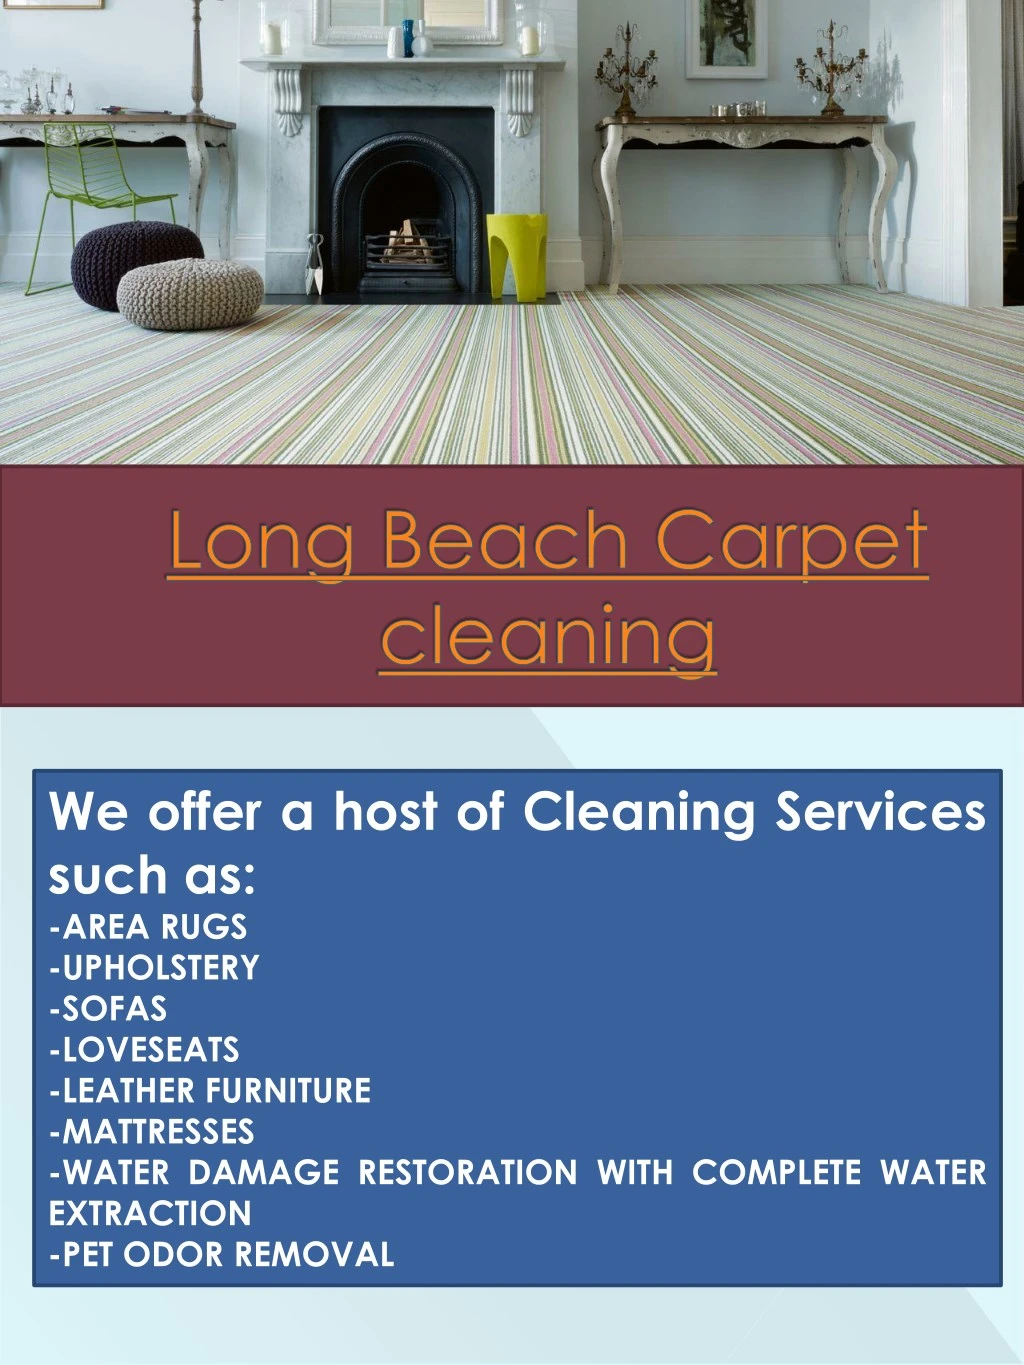 we offer a host of cleaning services such as area